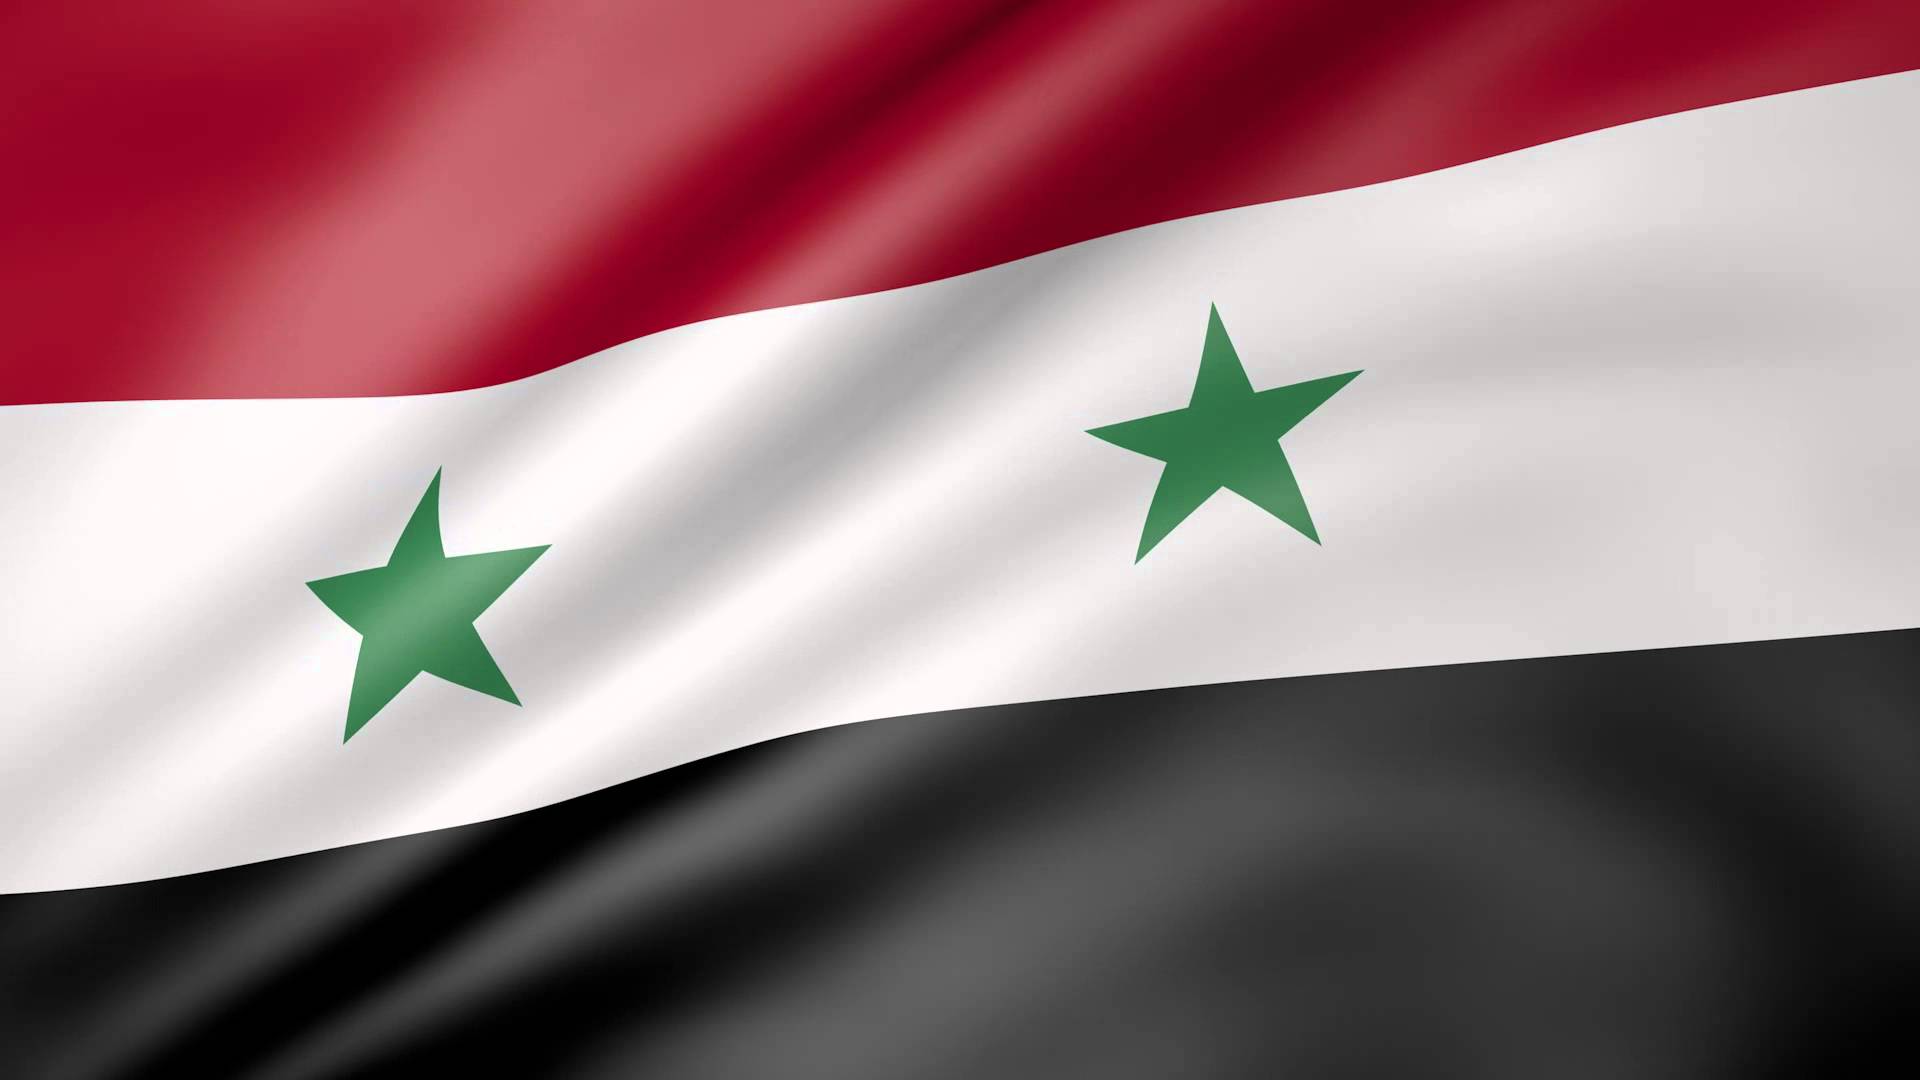 Best Syrian Wallpapers on HipWallpapers